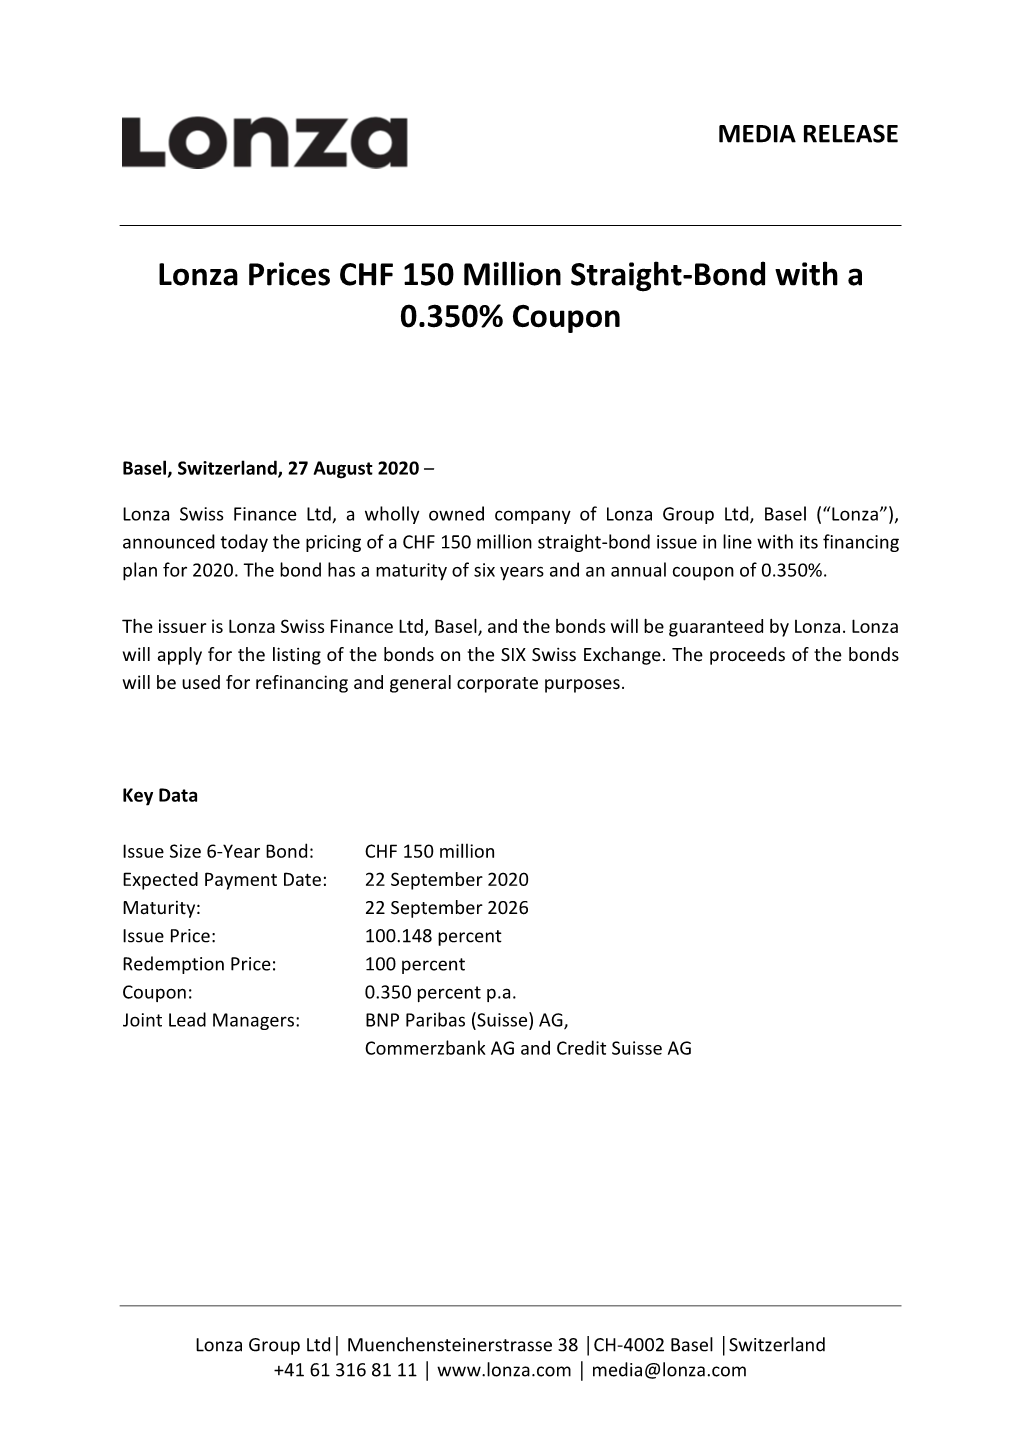 Lonza Prices CHF 150 Million Straight-Bond with a 0.350% Coupon